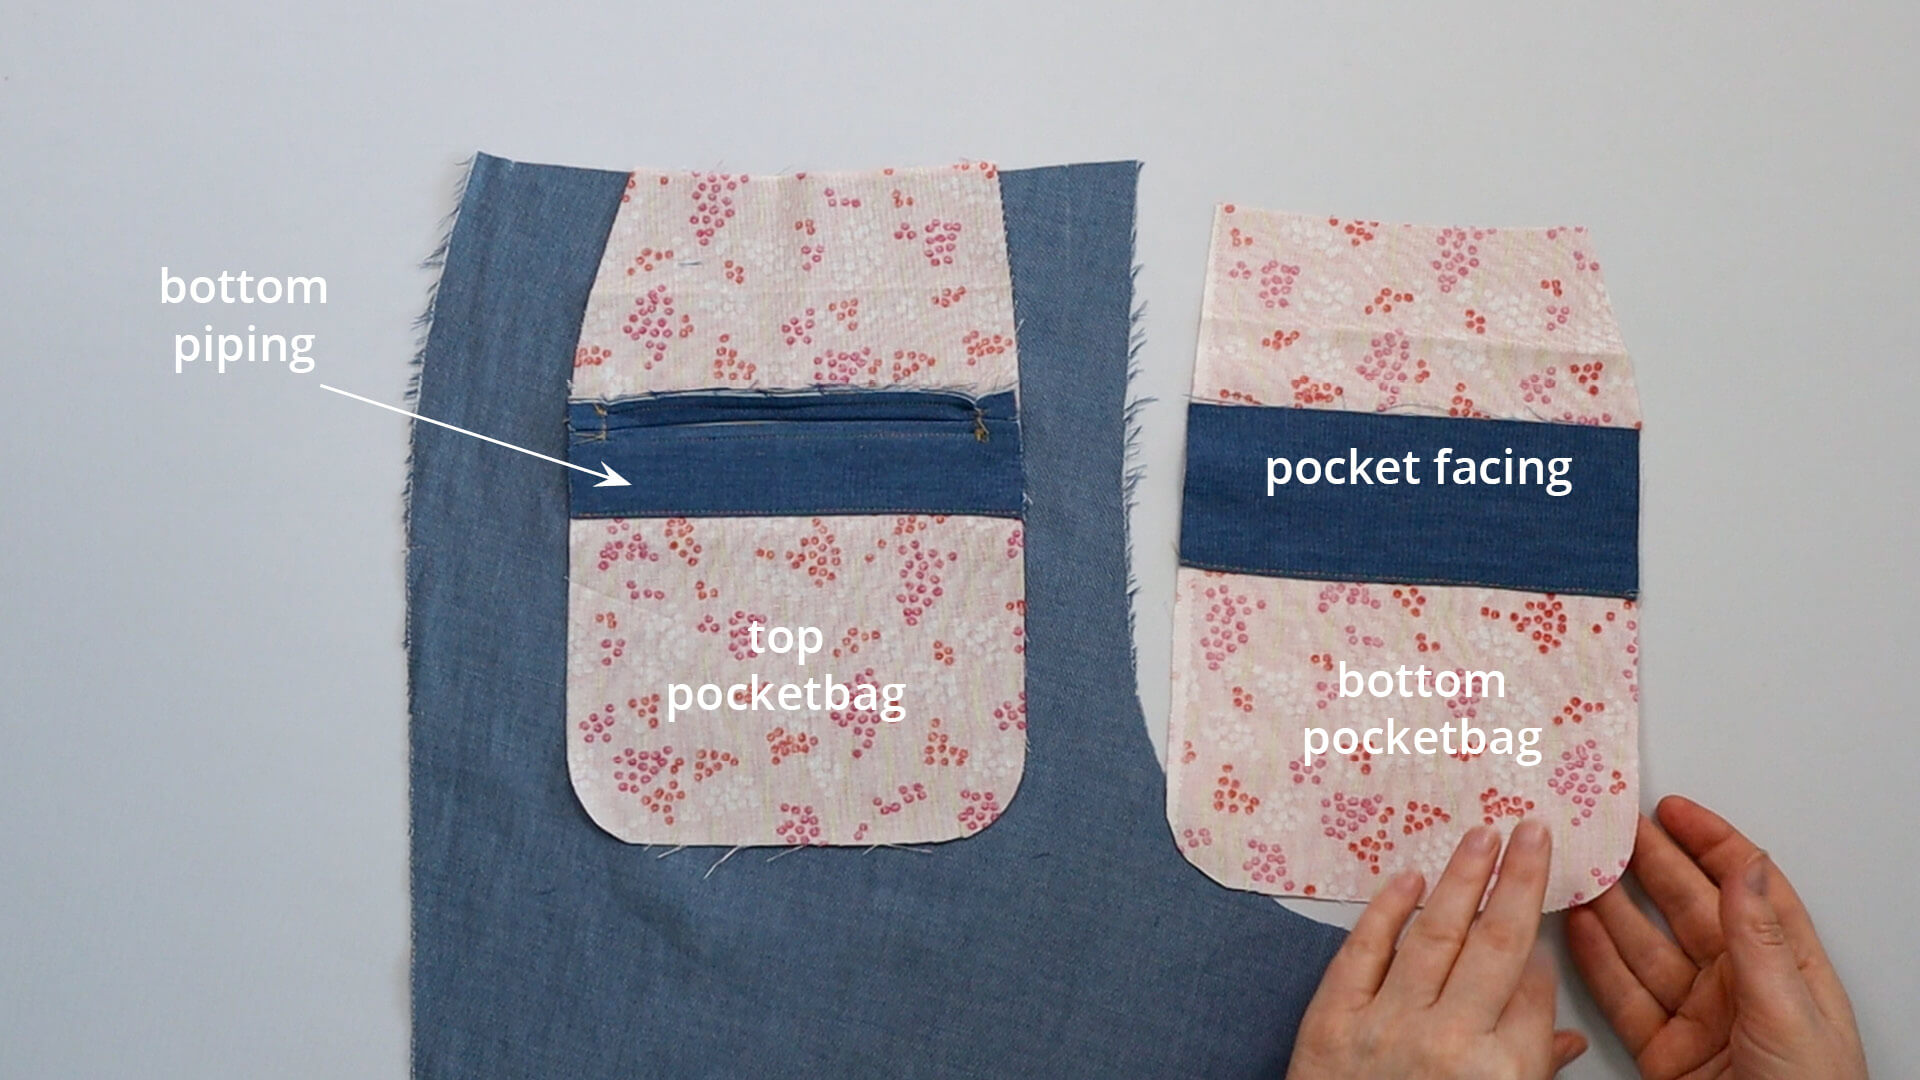 The picture shows how the lower welt is attached to the upper pocket bag.